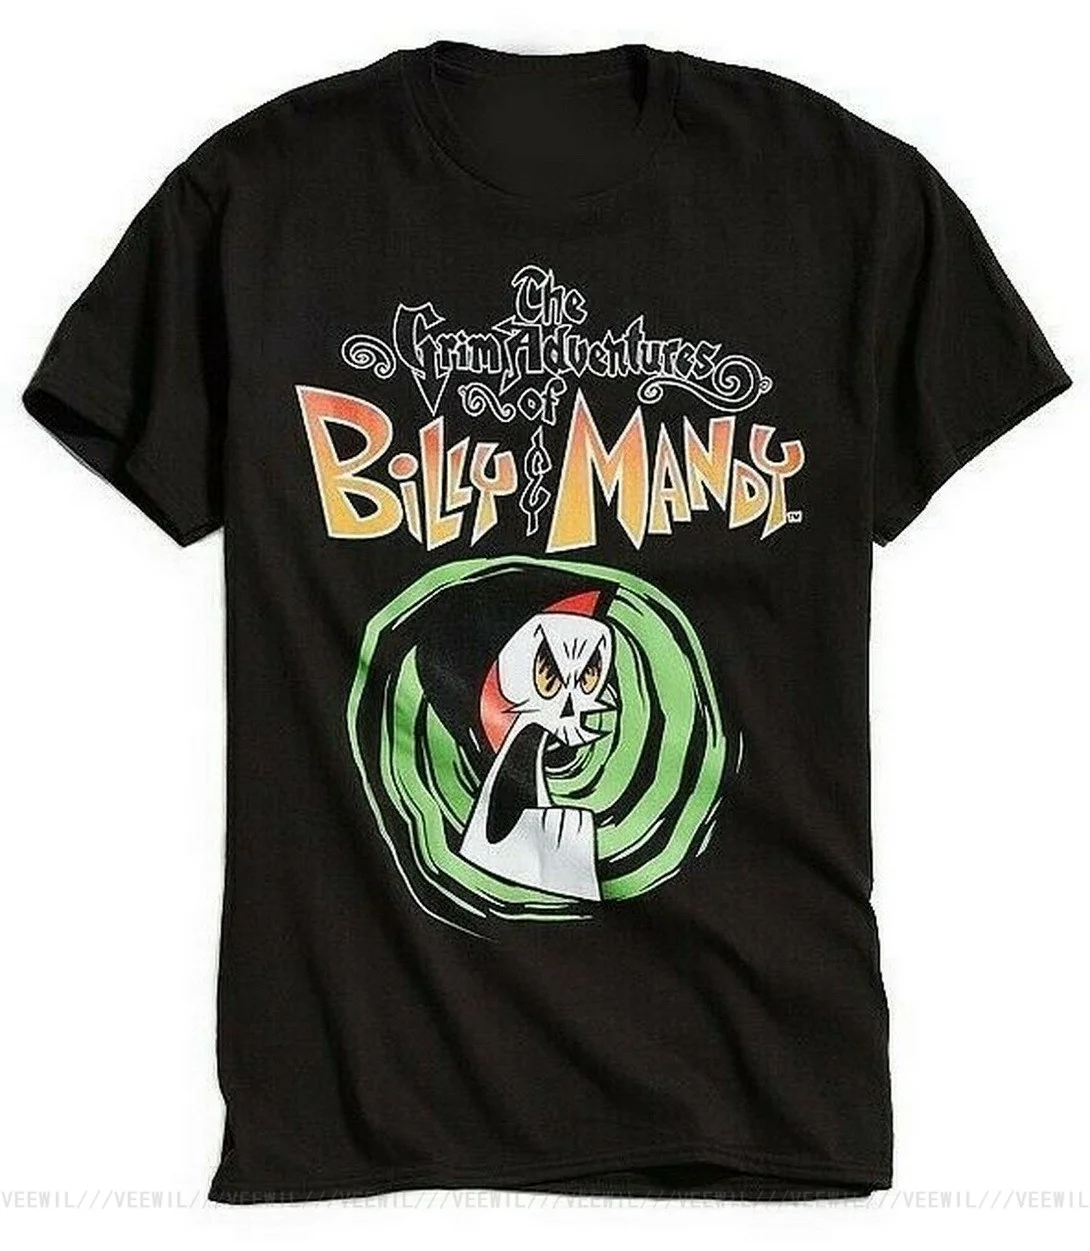 

CARTOON NETWORK THE GRIM ADVENTURES OF BILLY AND MANDY Tops Tee T Shirt MENS CARTOON TEE T-Shirt New Unisex Funny